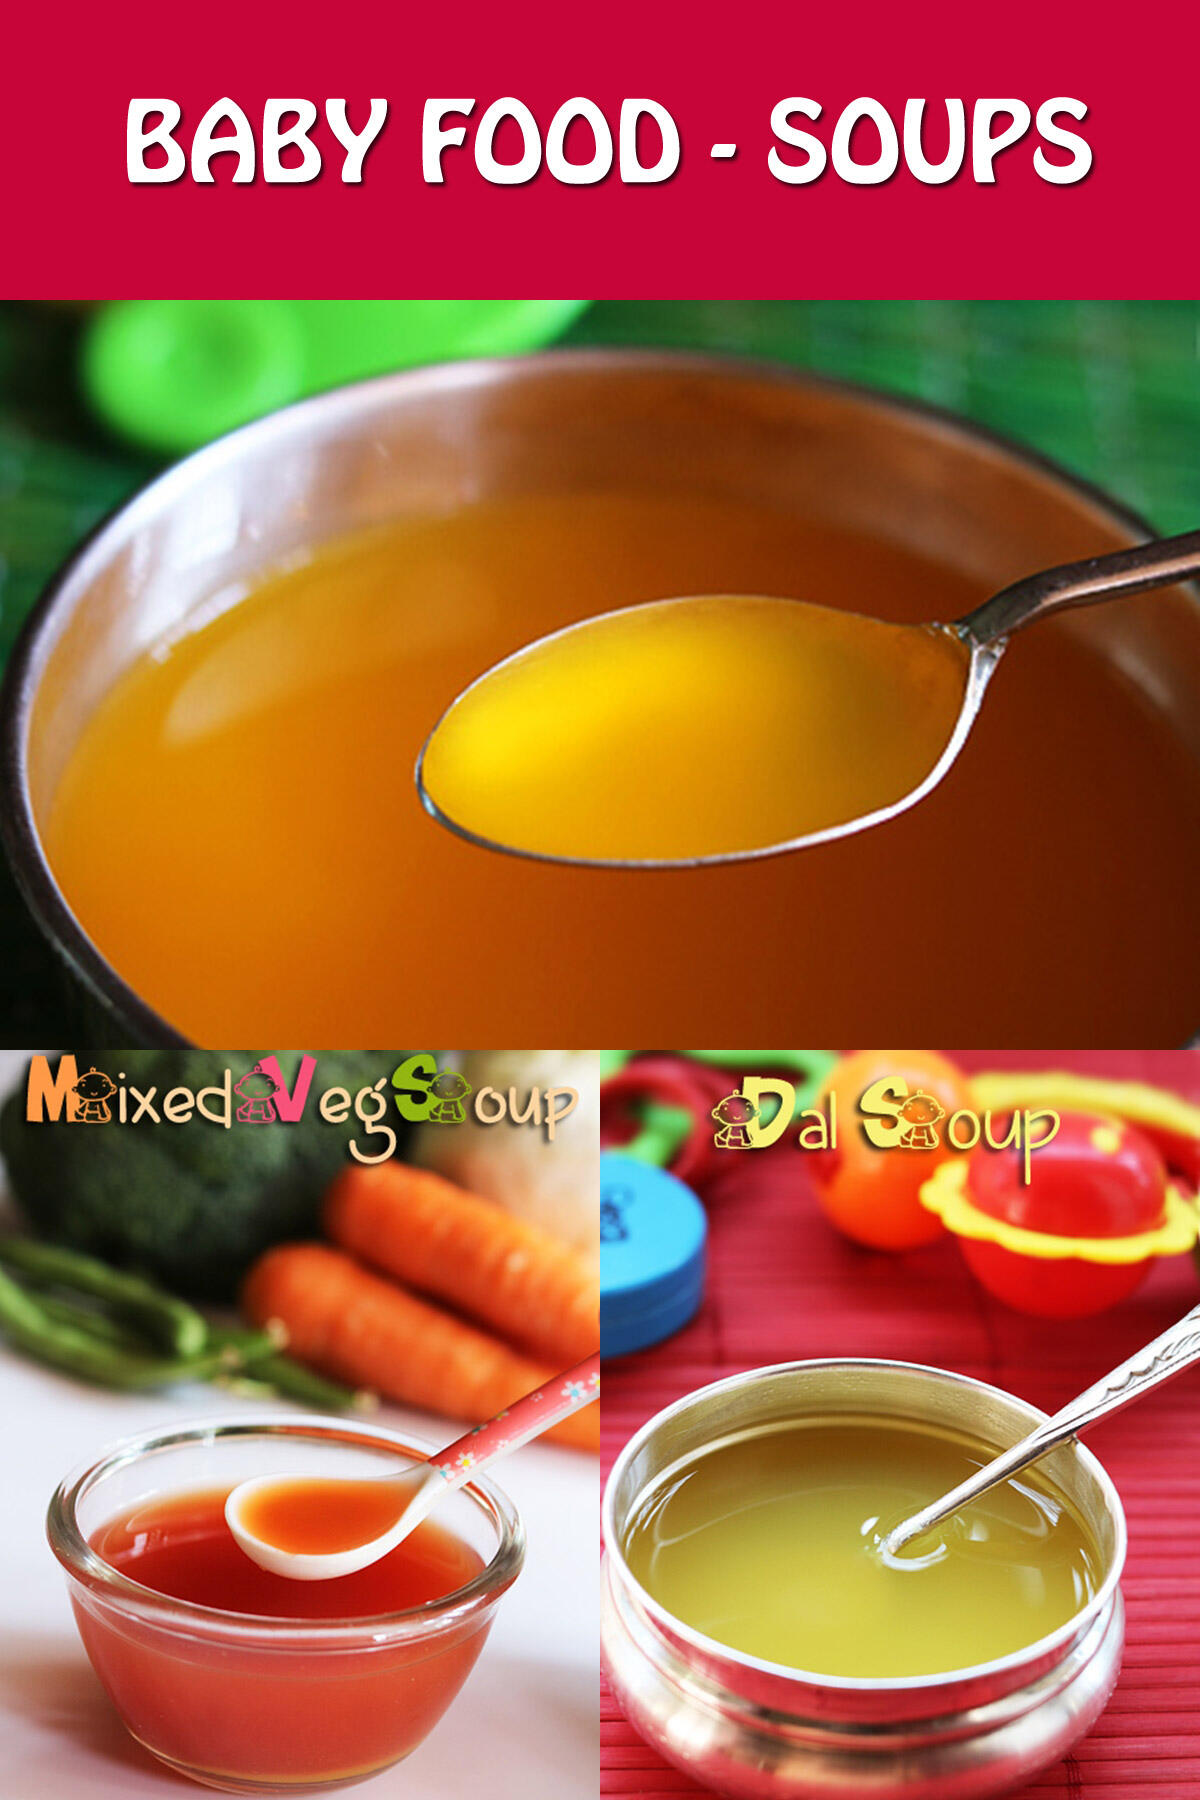 a collection of mild soup recipes for babies